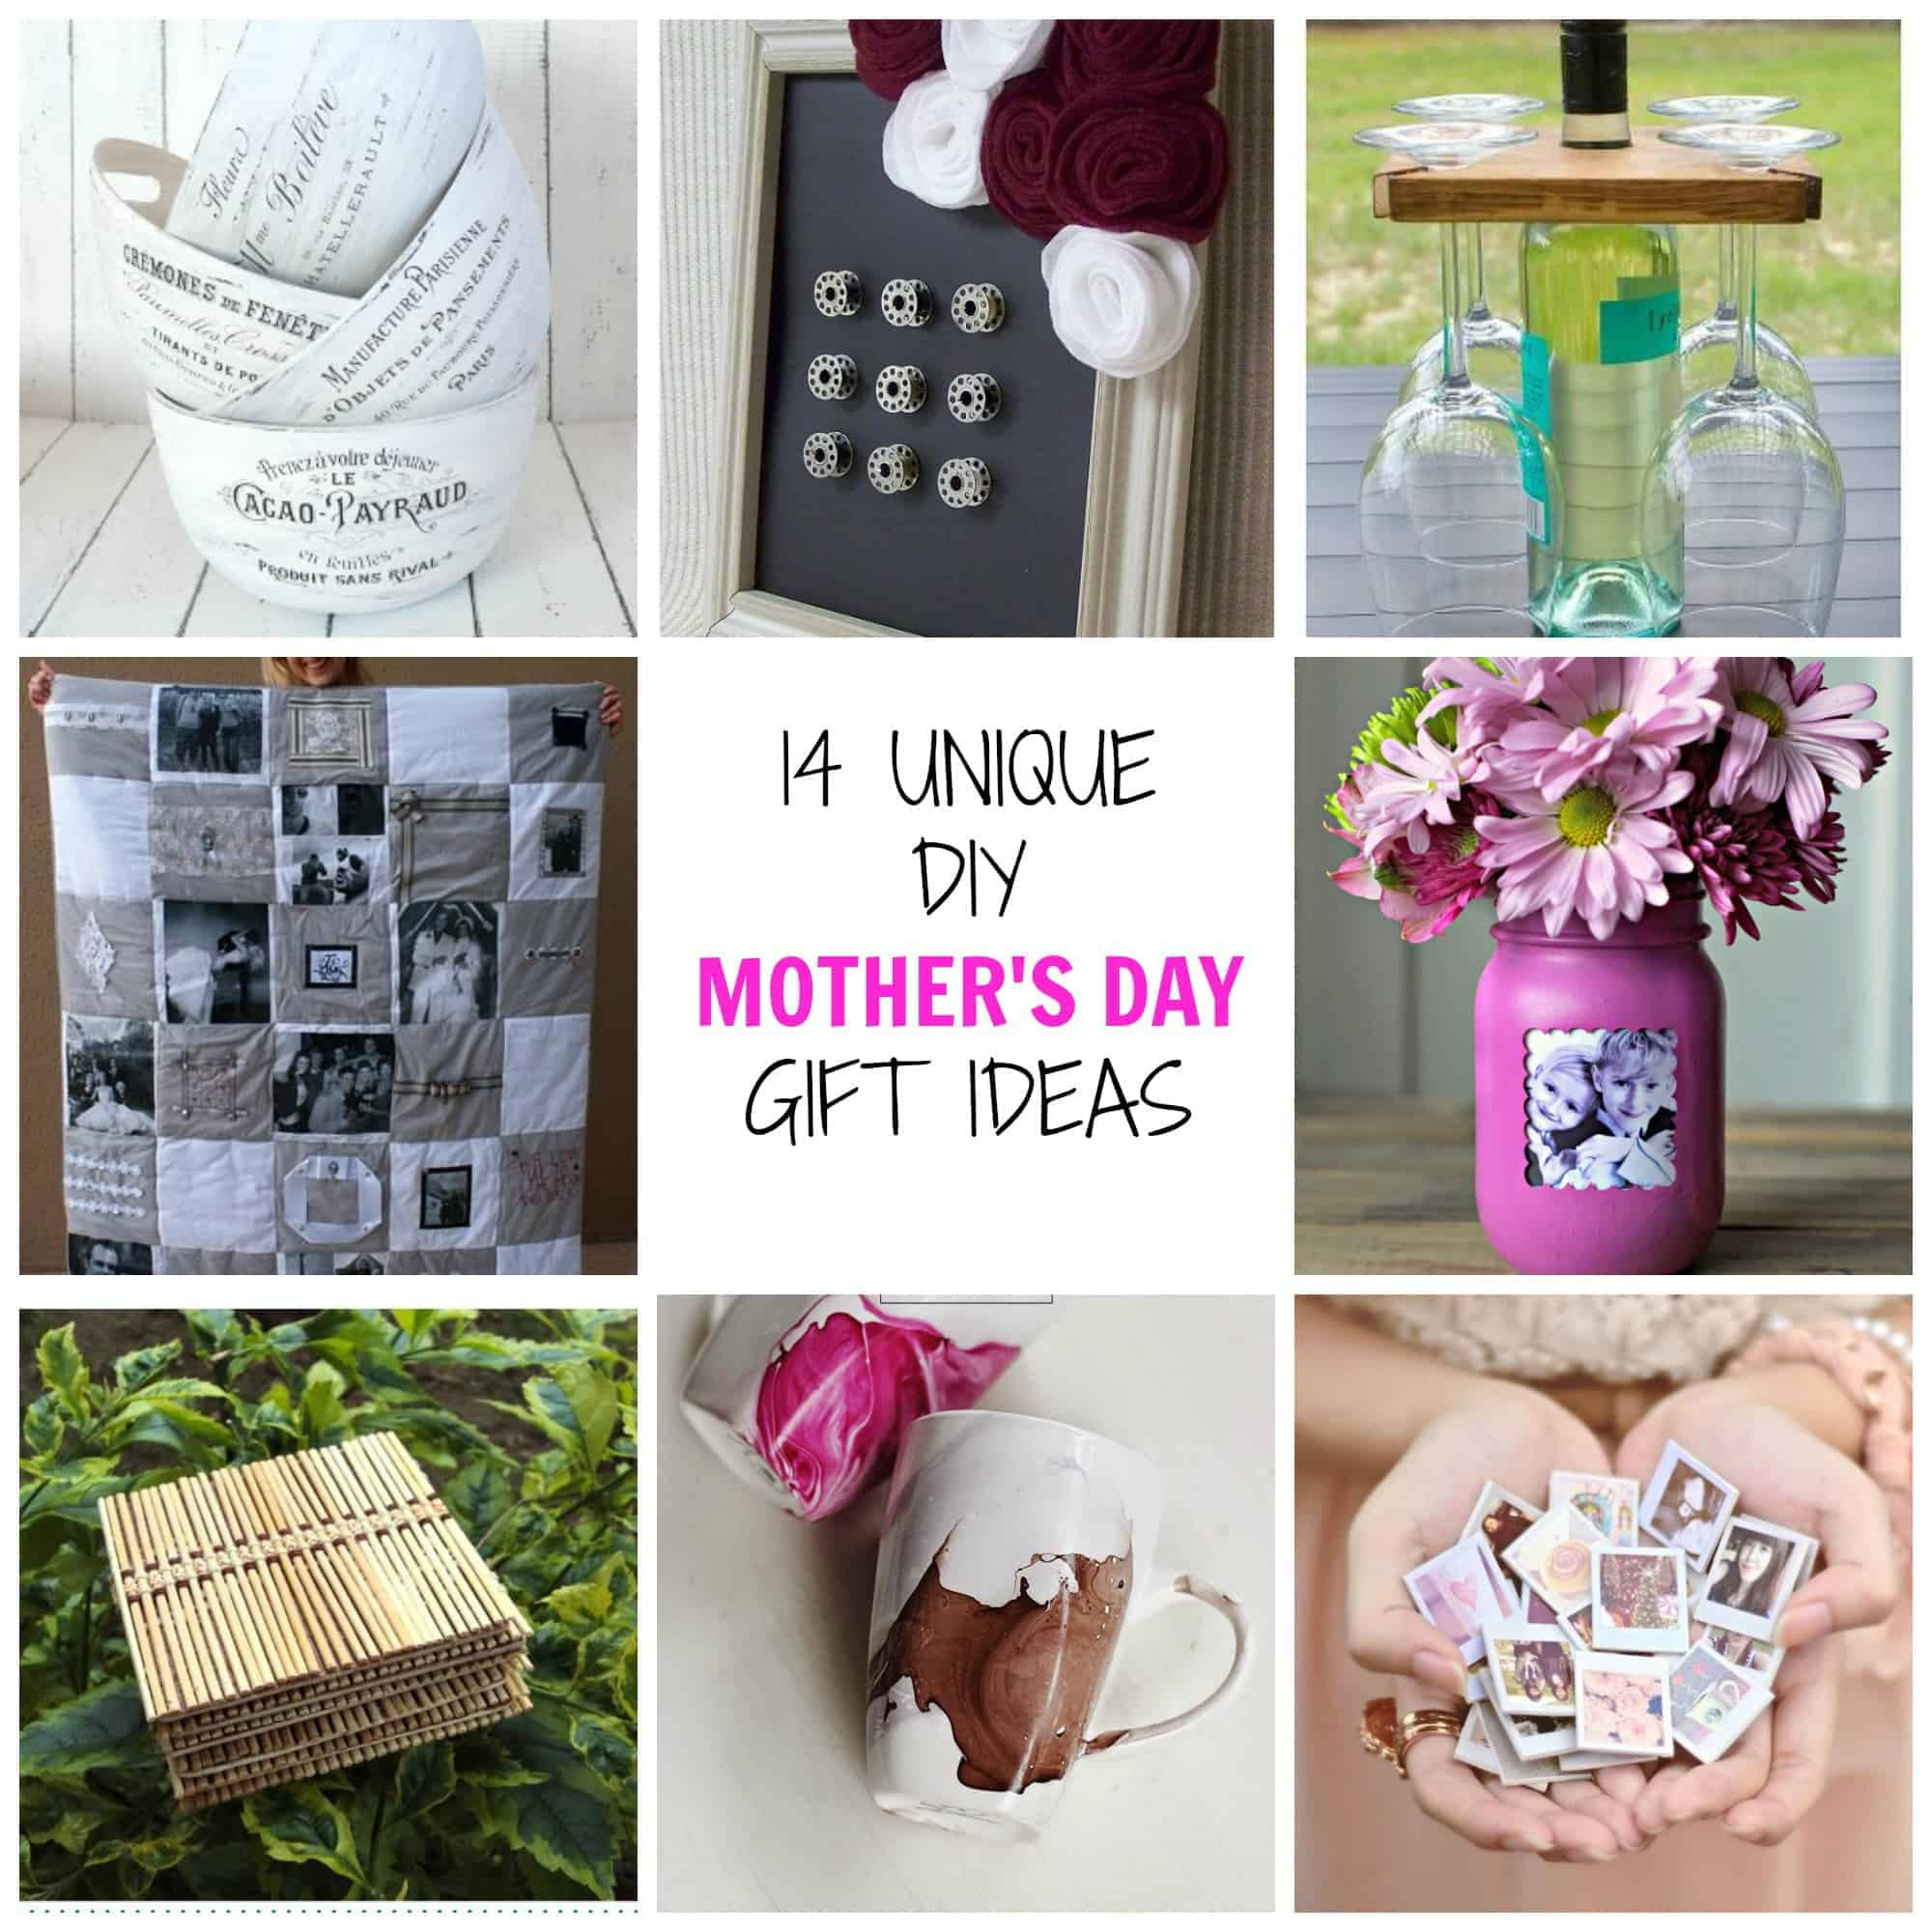 Diy Mothers Day Gift Ideas
 14 Unique DIY Mother s Day Gifts Simplify Create Inspire